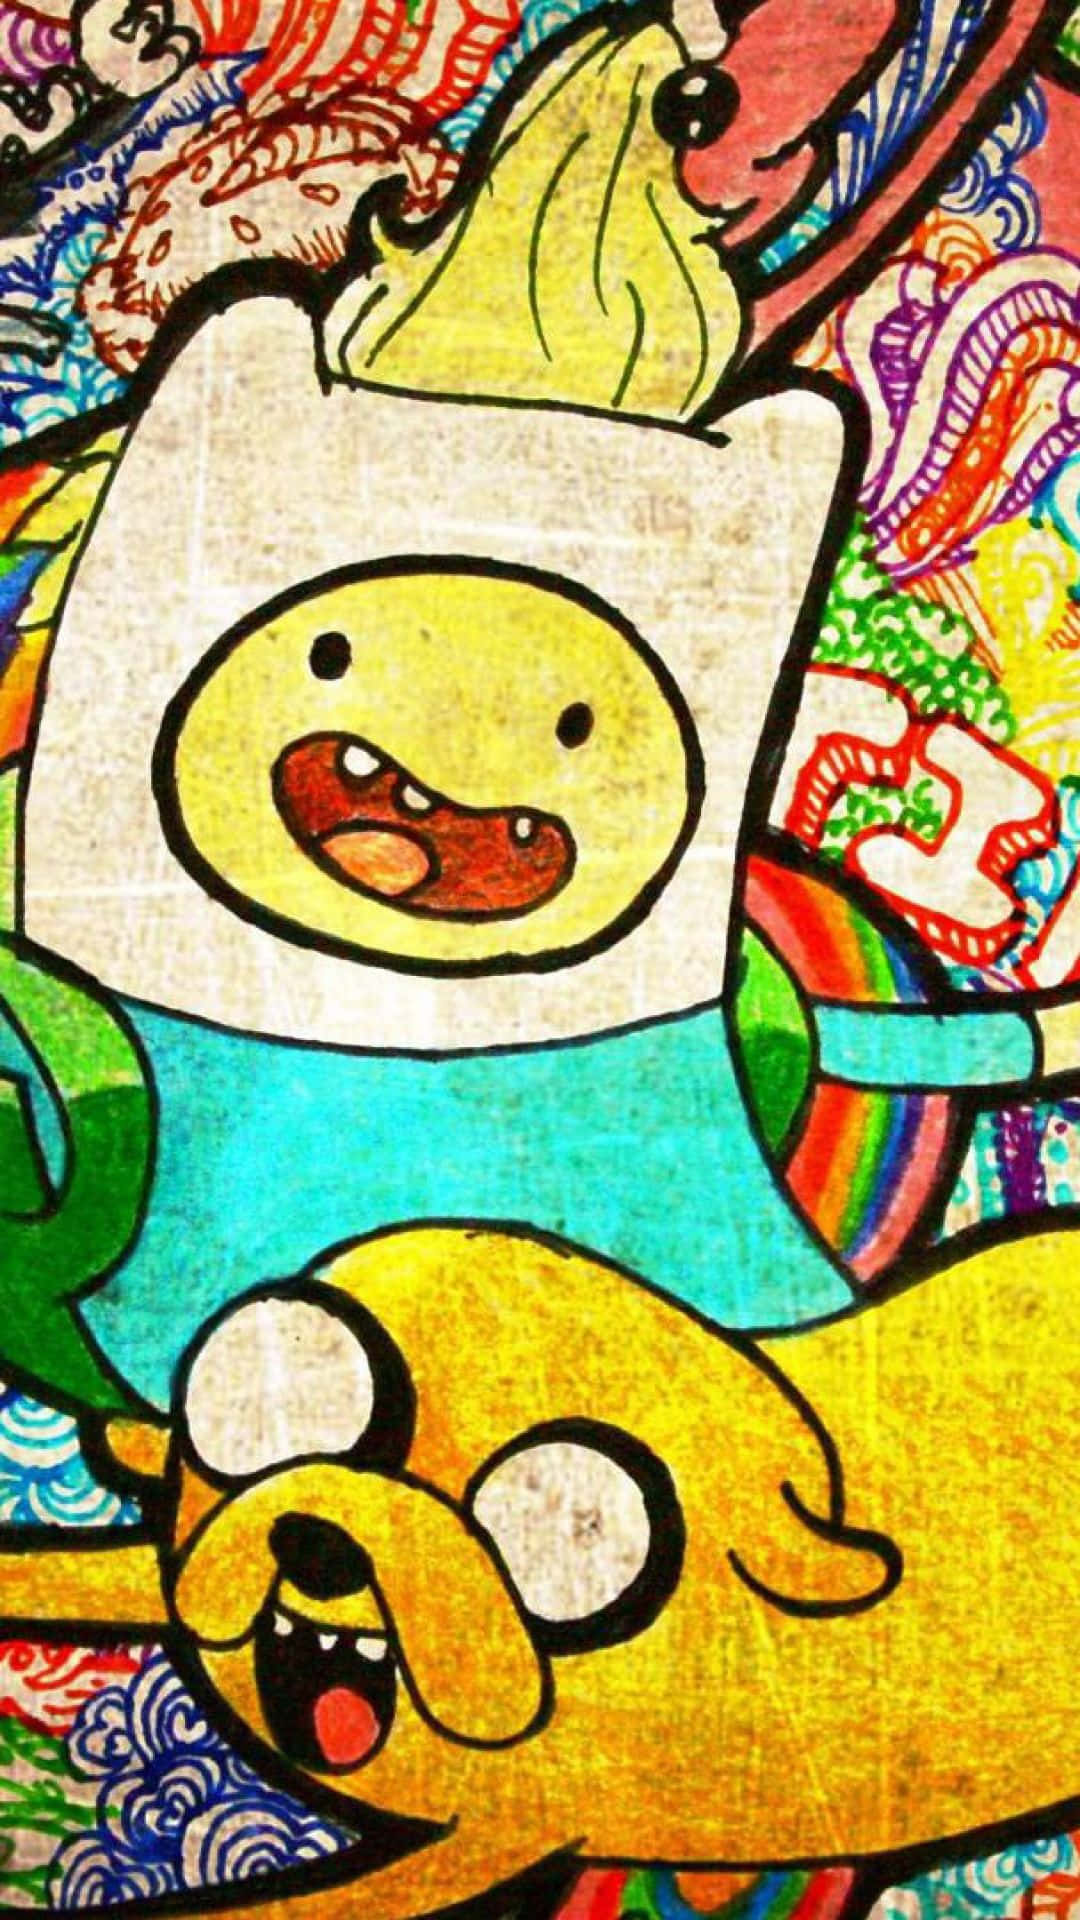 Adventure Time anywhere you go with this awesome iPhone wallpaper! Wallpaper